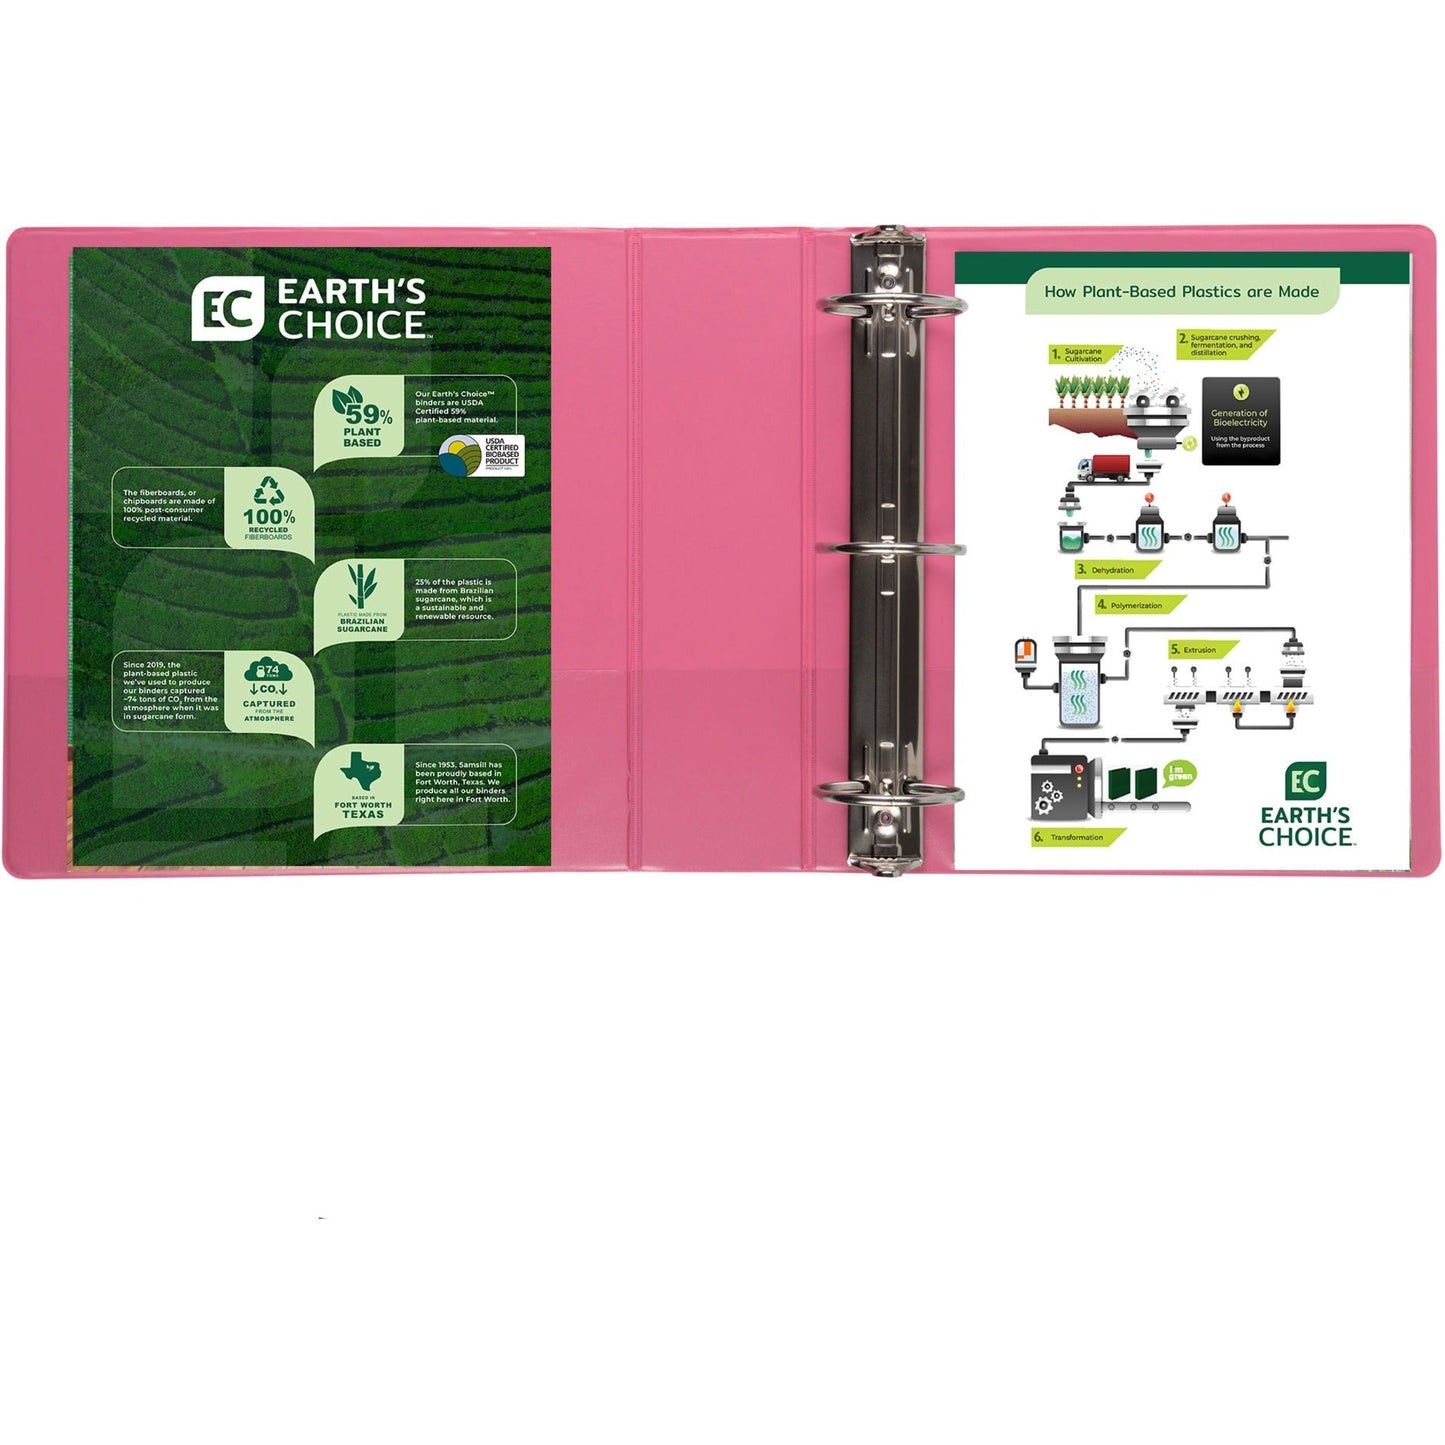 Samsill Earth's Choice Plant-Based Durable 3 Inch 3 Ring View Binders - Assorted